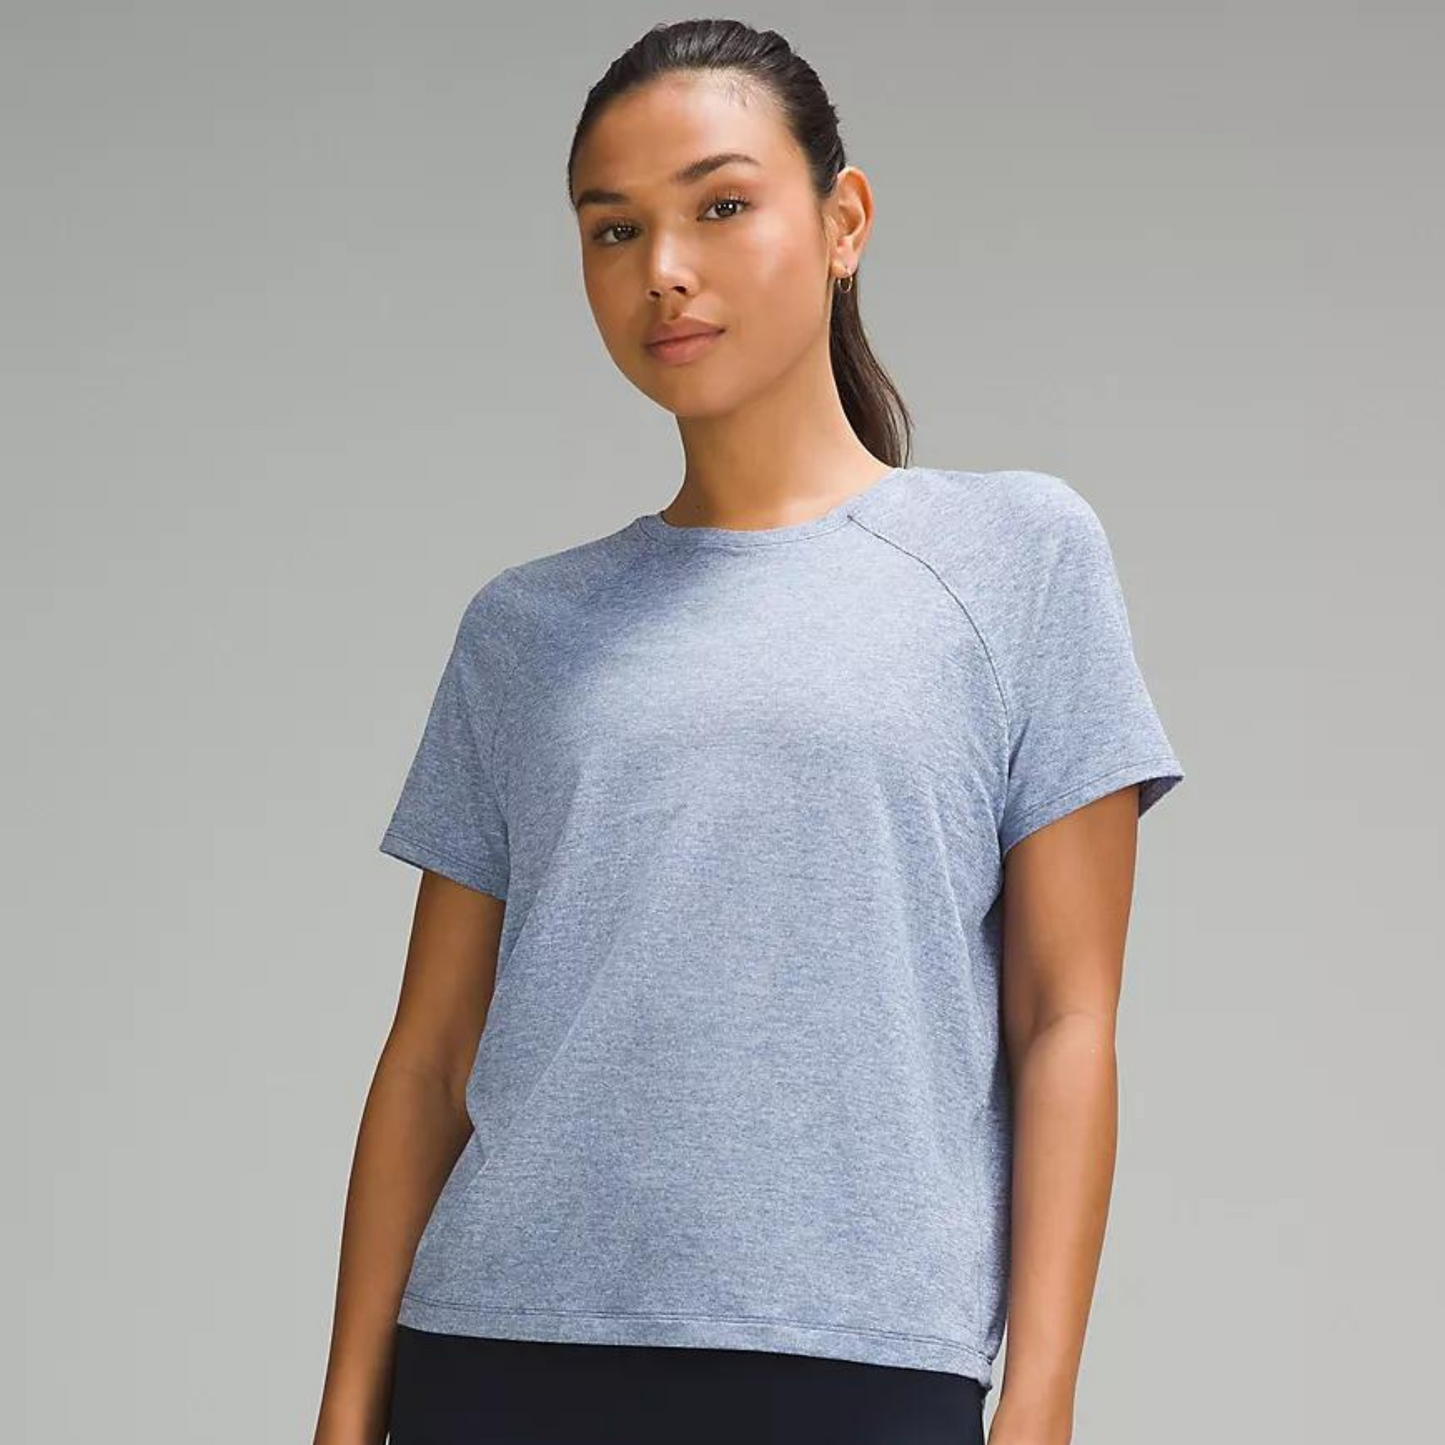 lululemon -  License to Train Classic-Fit T-Shirt - Heathered Oasis Blue